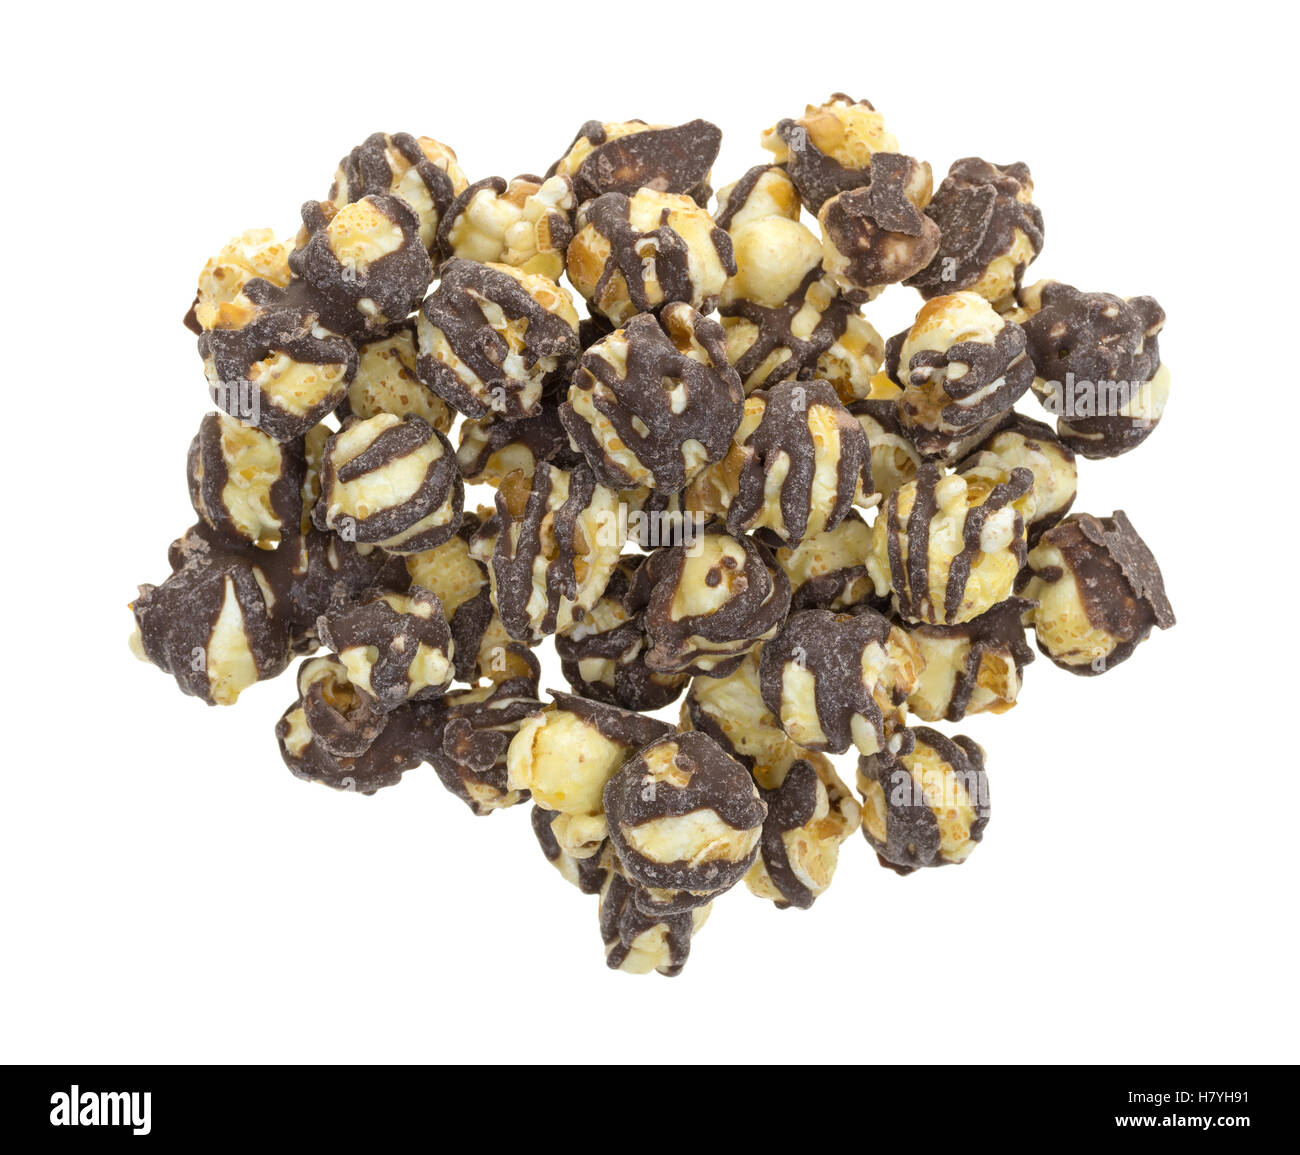 Top view of a serving of fudge drizzled popcorn isolated on a white background. Stock Photo